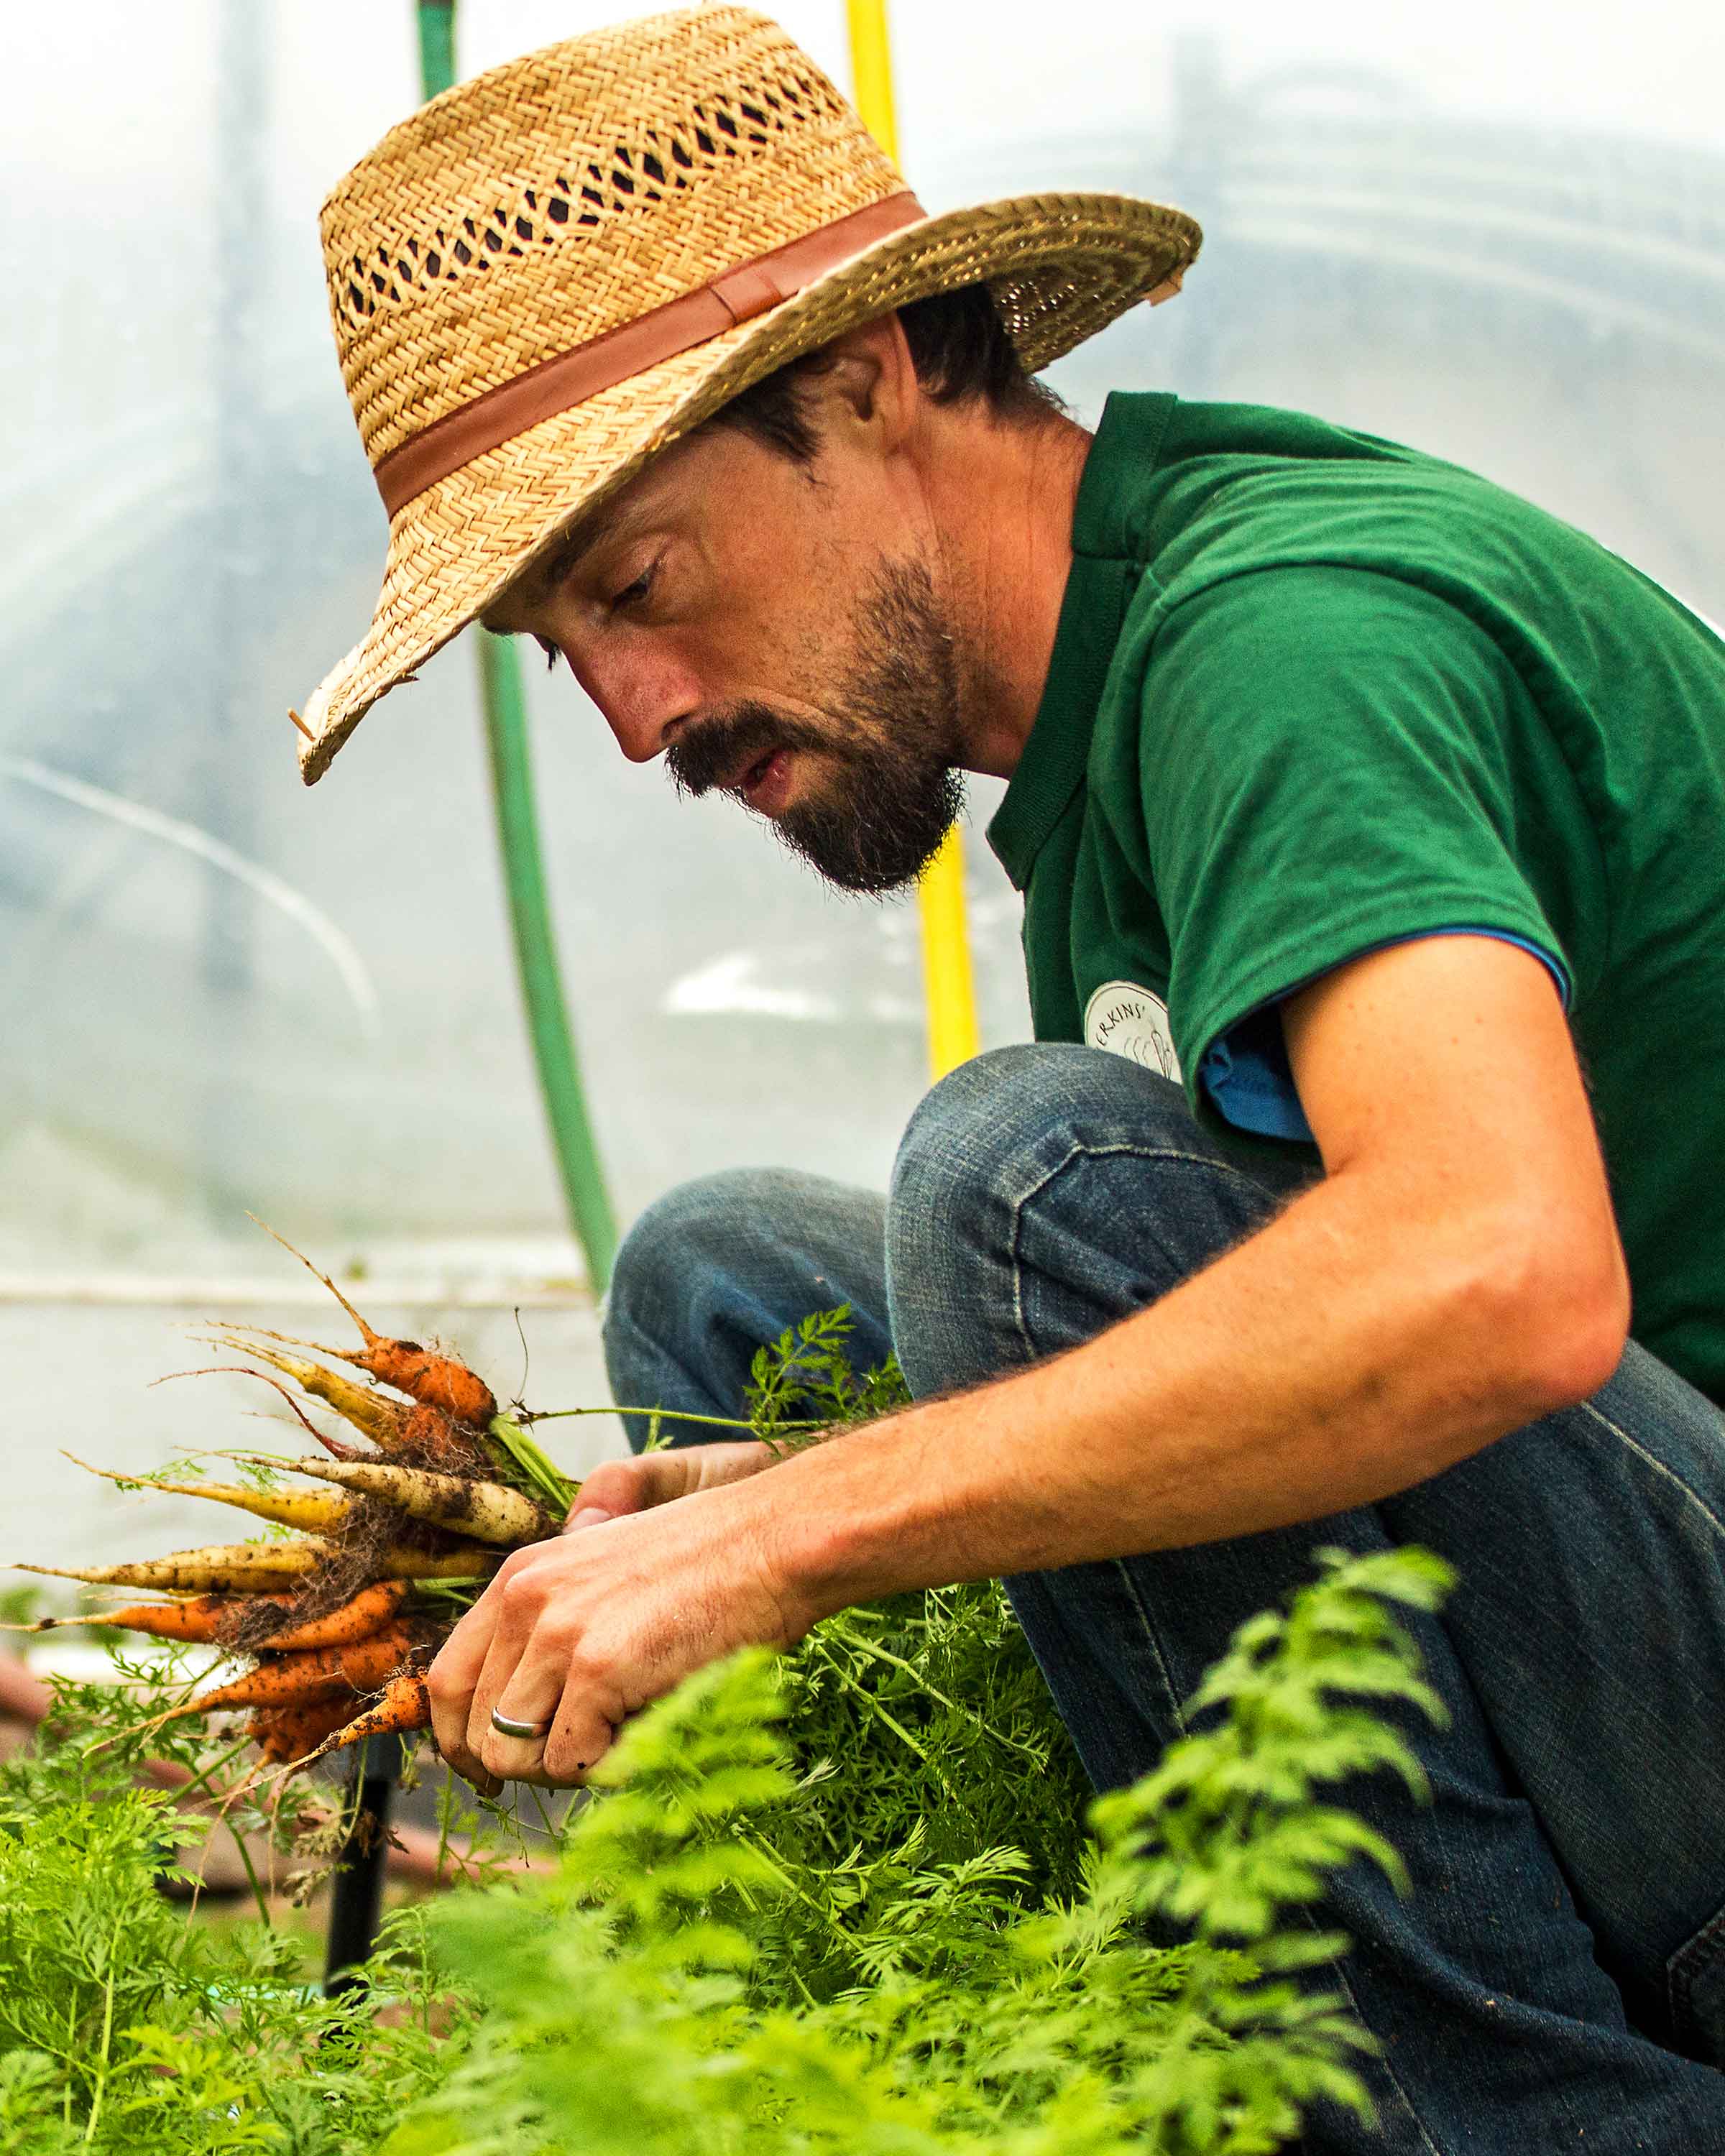 Image of a man harvesting carrots.